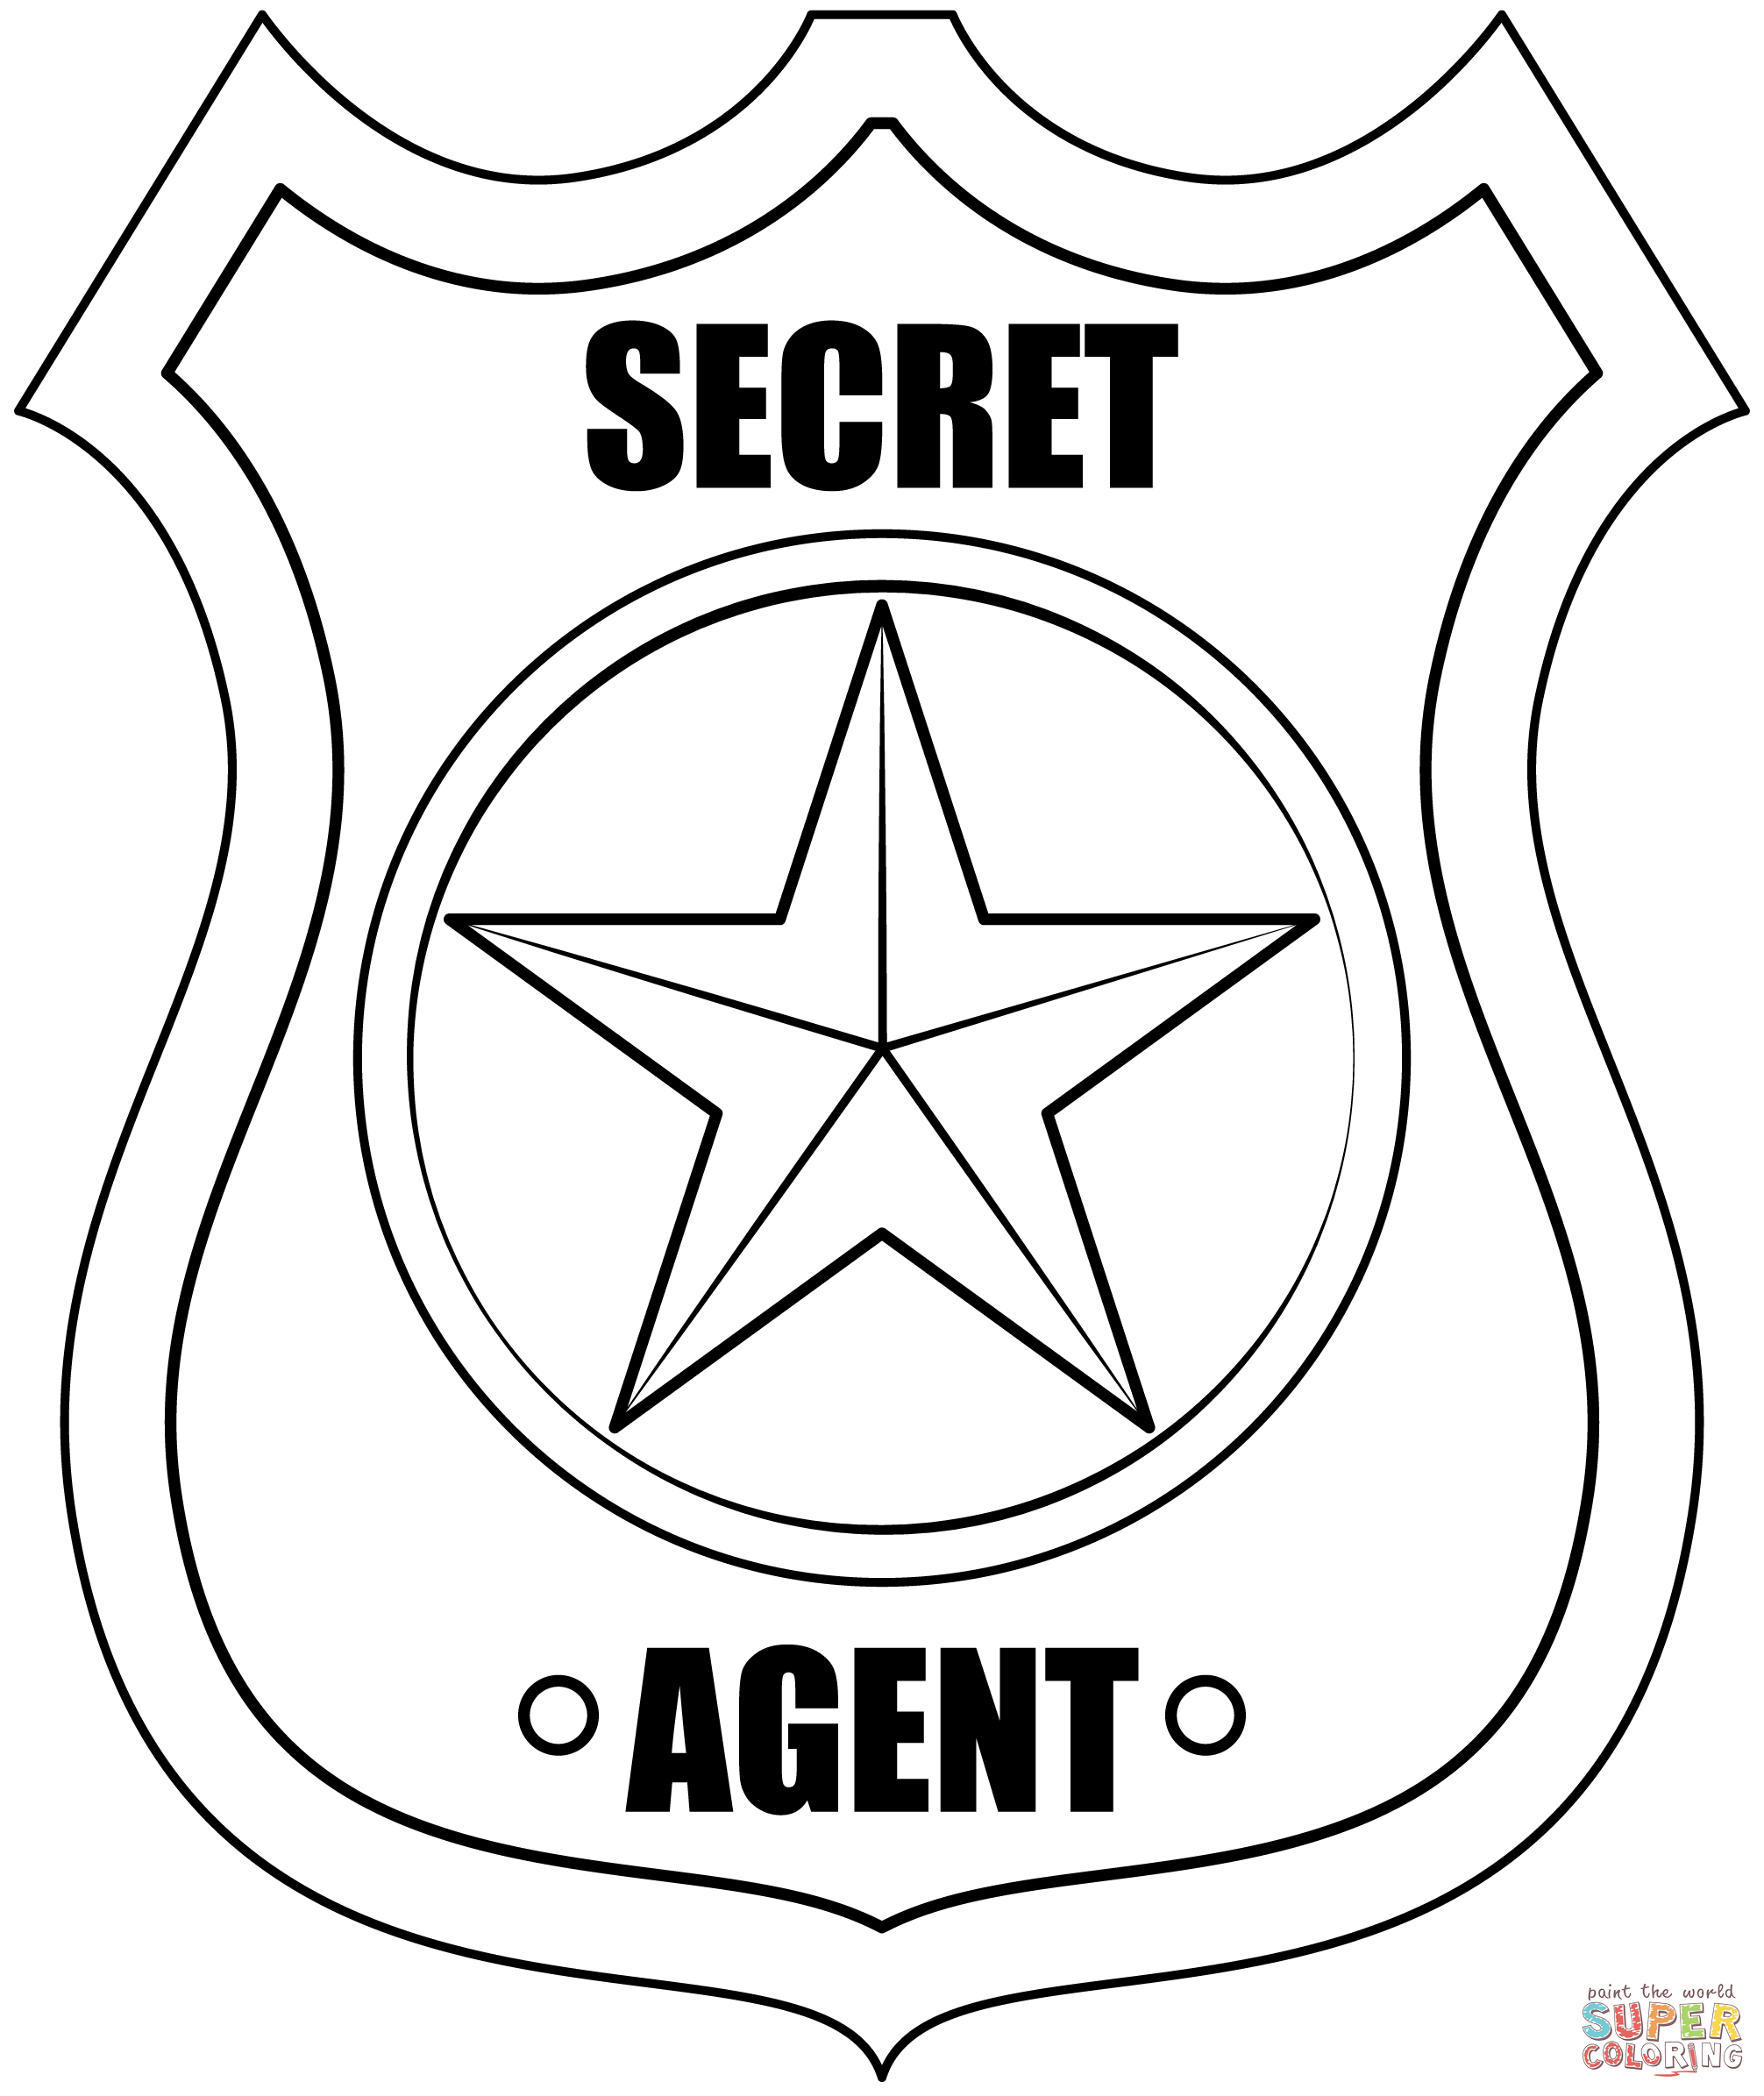 Secret Agent Badge coloring page | Free Printable Coloring Pages